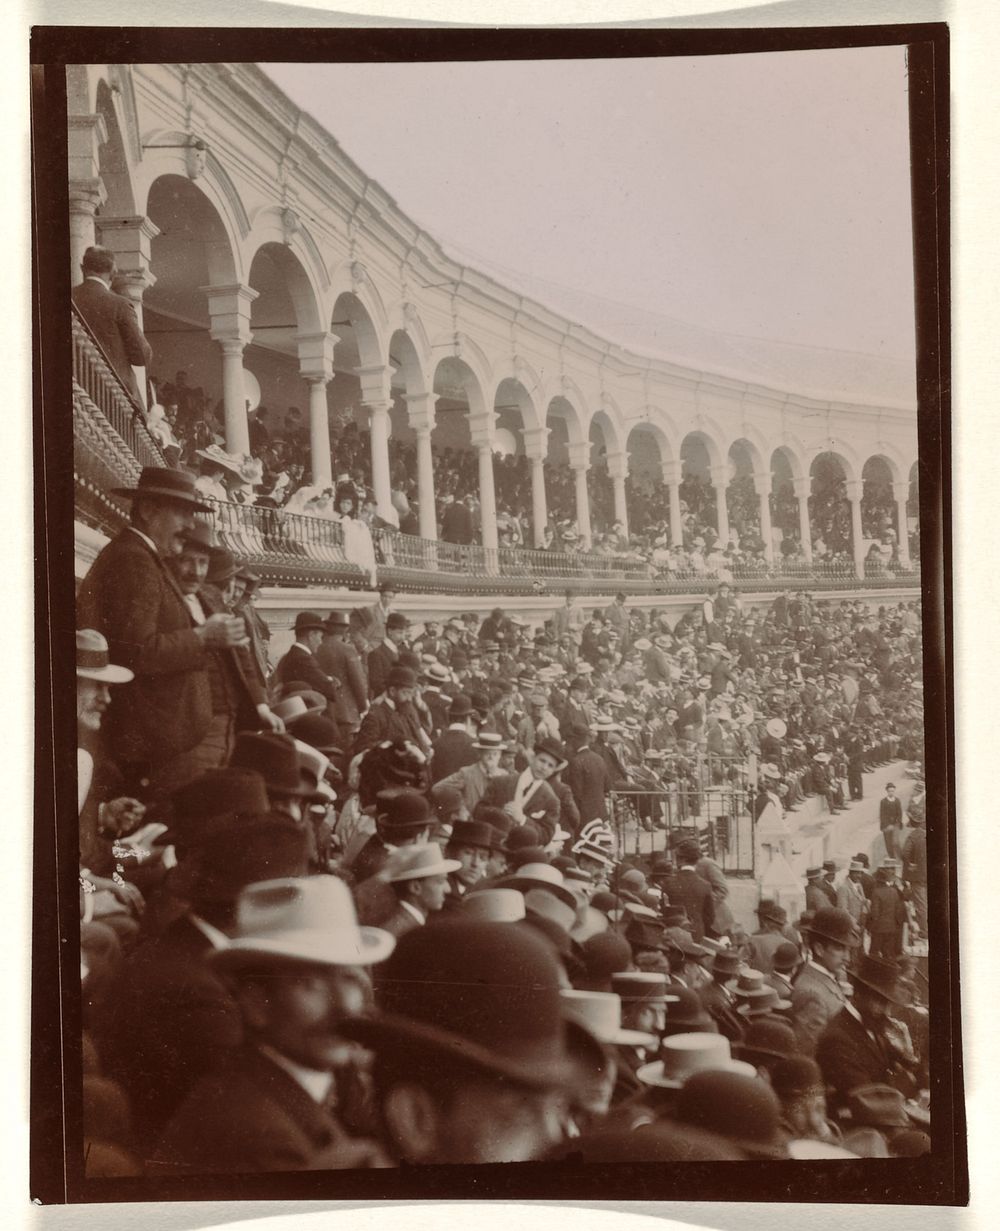 At the Bull Fight, Spain (1905 - 1922) by anonymous